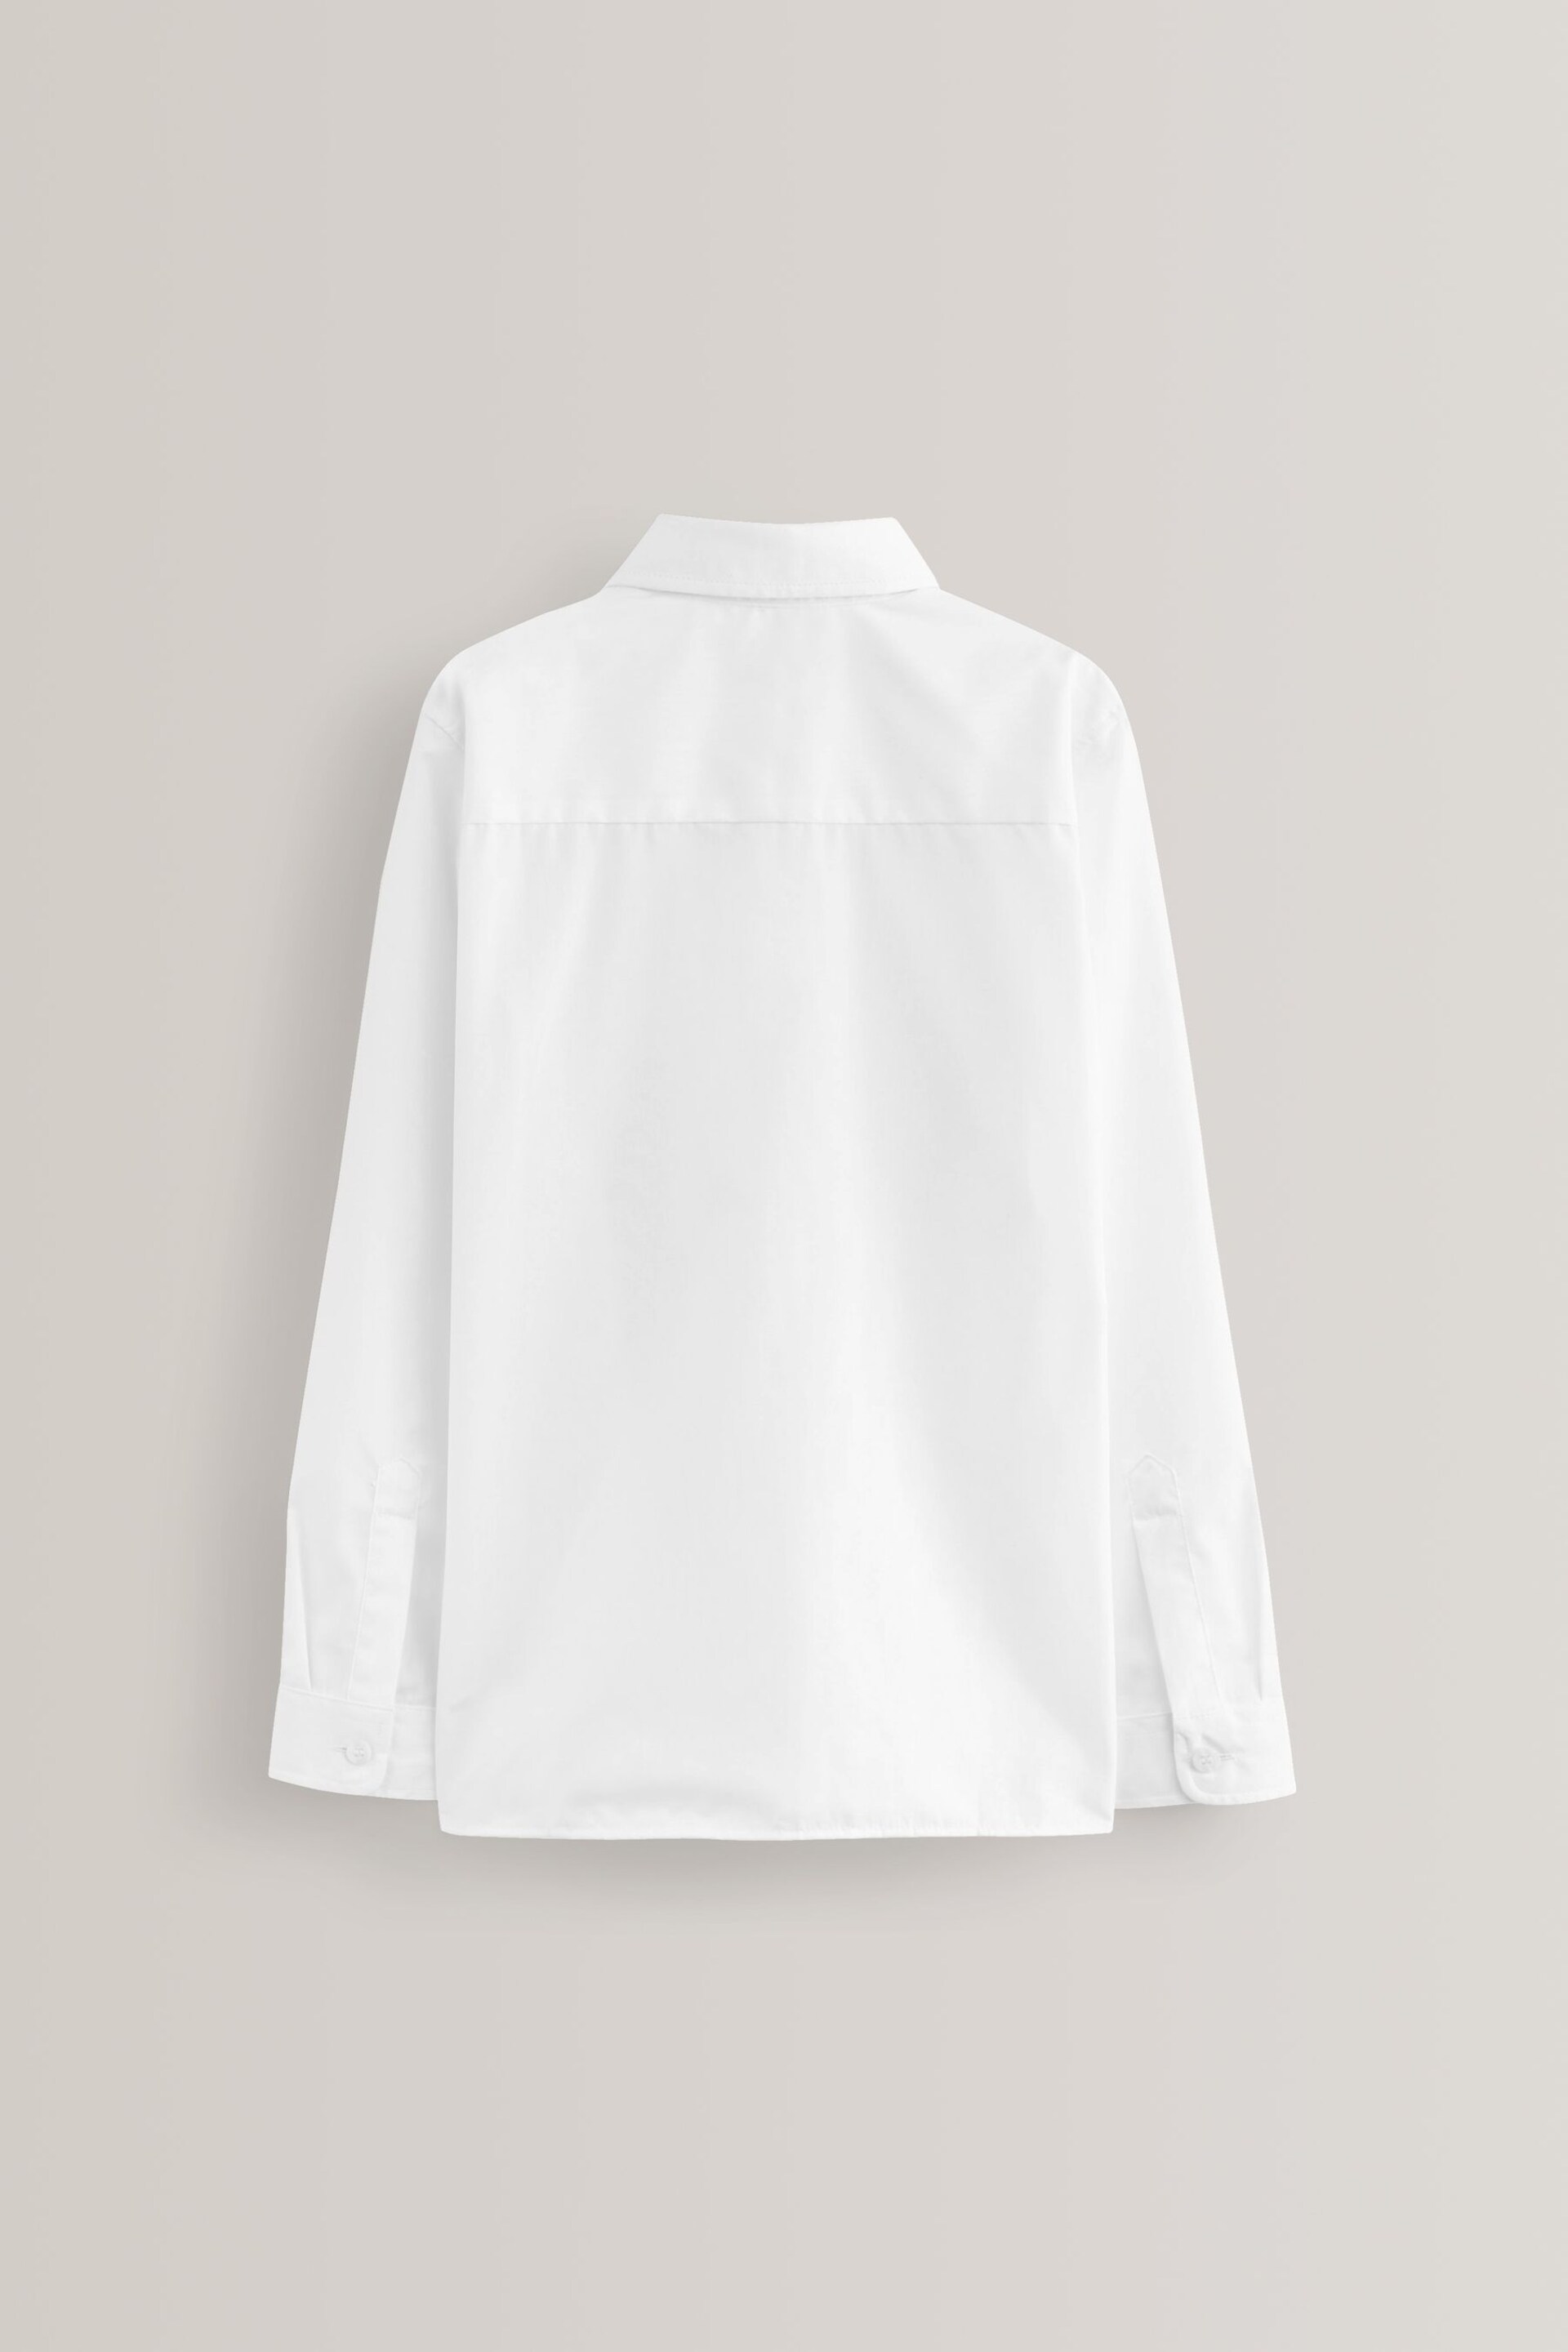 White Easy Fastening Long Sleeve School Shirts 2 Pack (3-12yrs) - Image 4 of 4